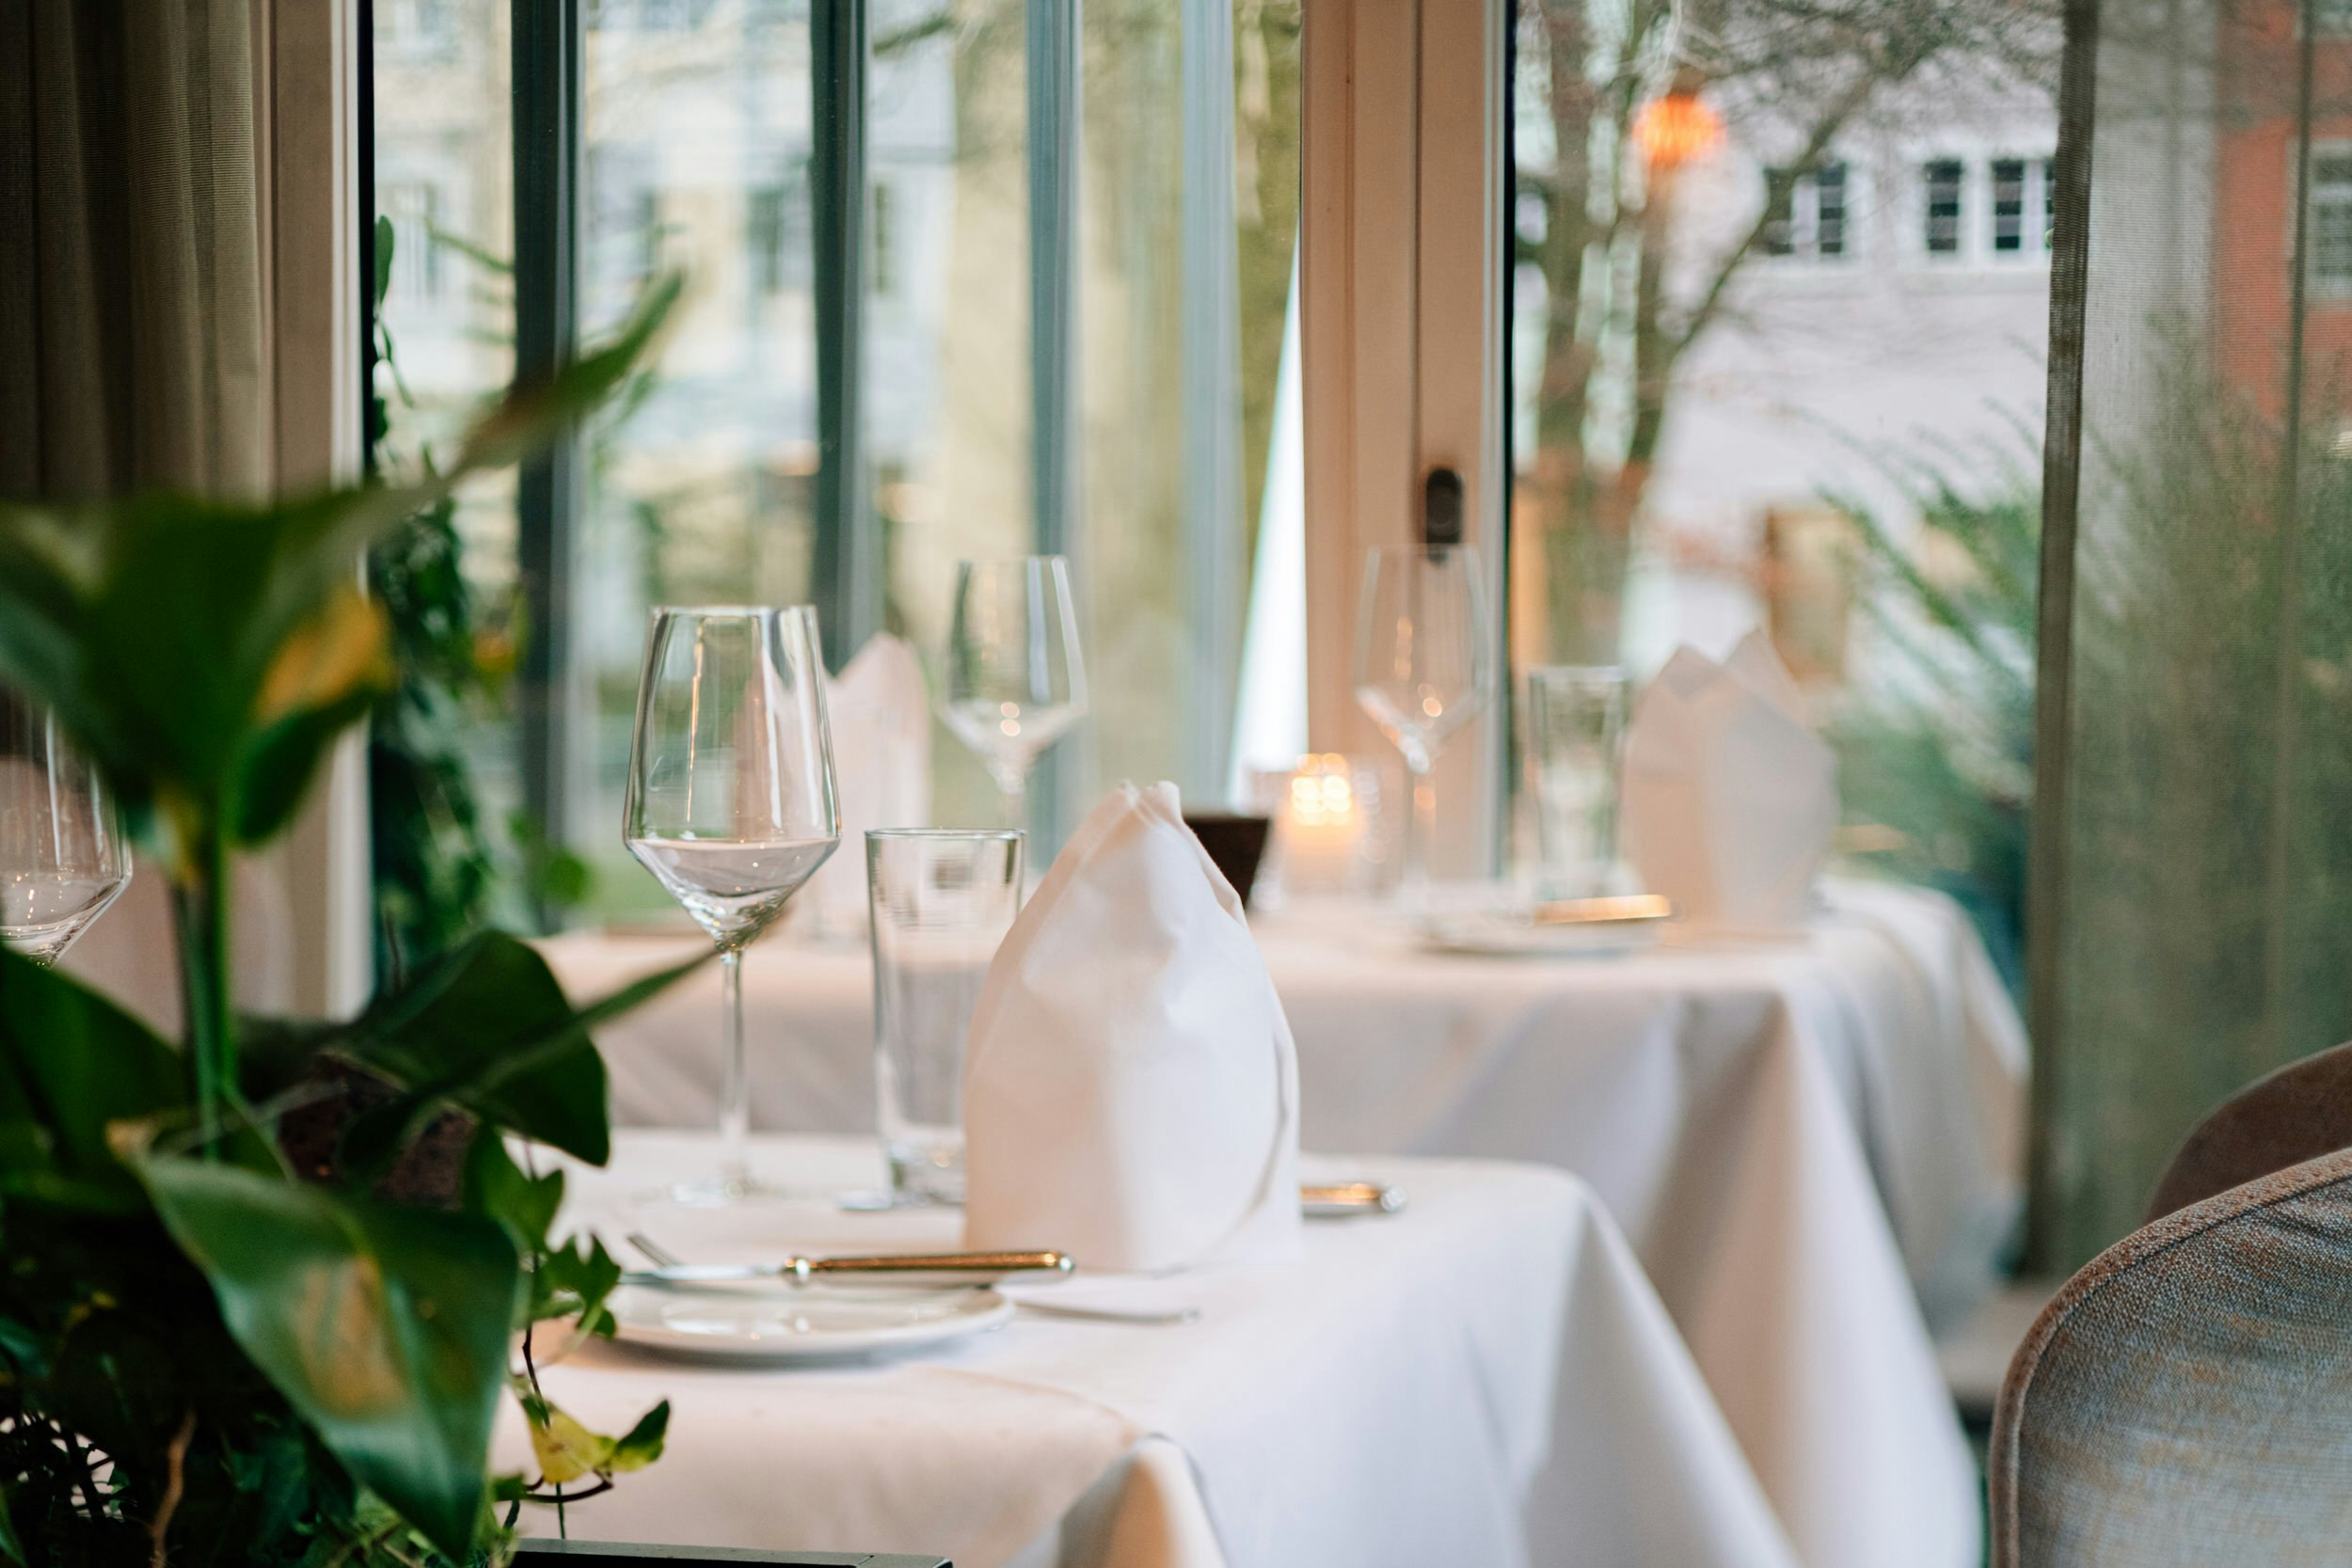 Candle light dinner with 3 courses<br>CHF 168.-